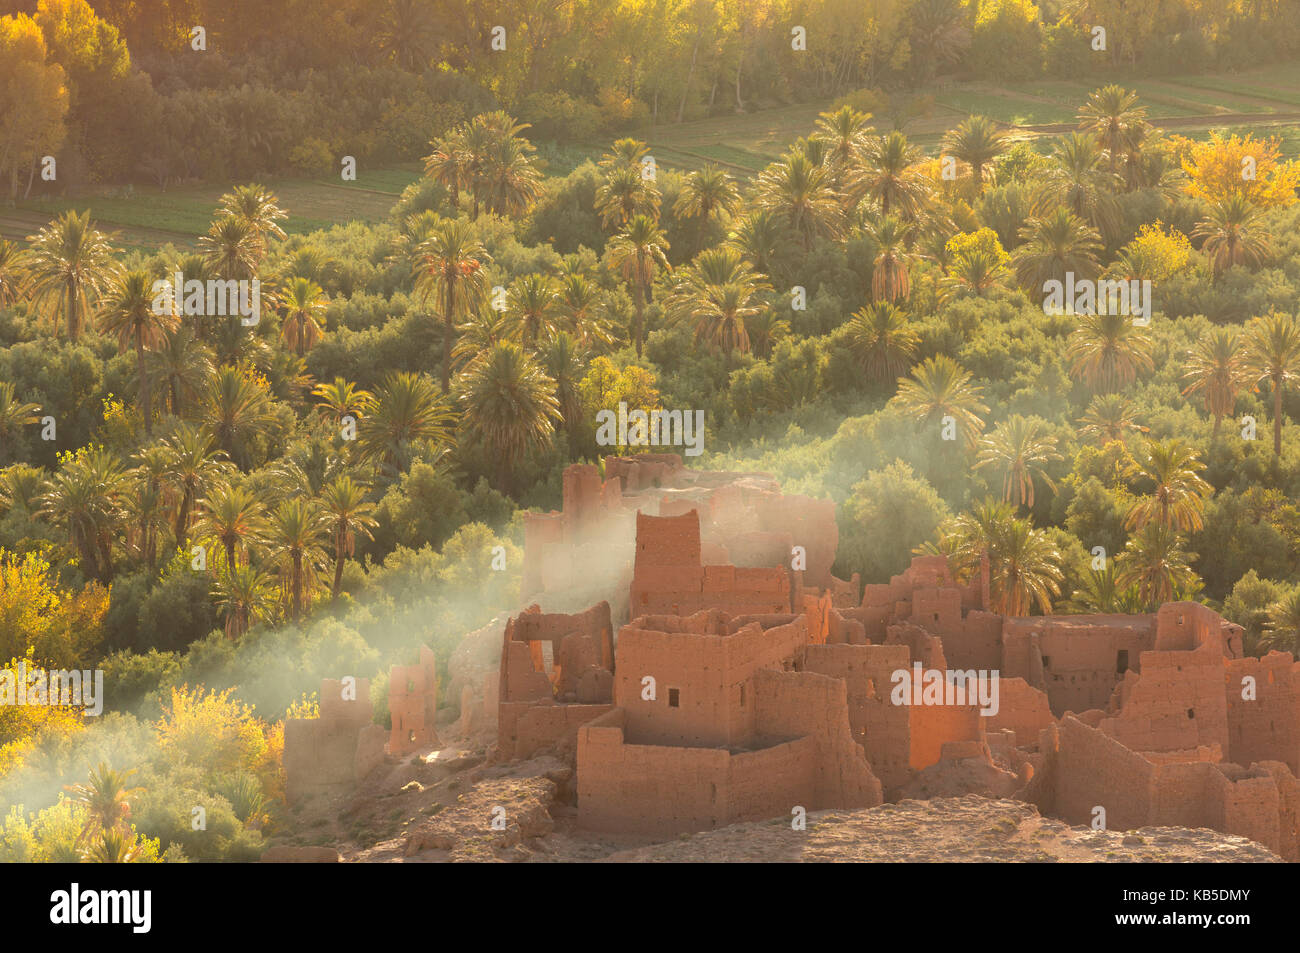 Ruined kasbah in the palmerie near Tinerhir, with smoke from fire swirling through the palm trees, Morocco, North Africa, Africa Stock Photo